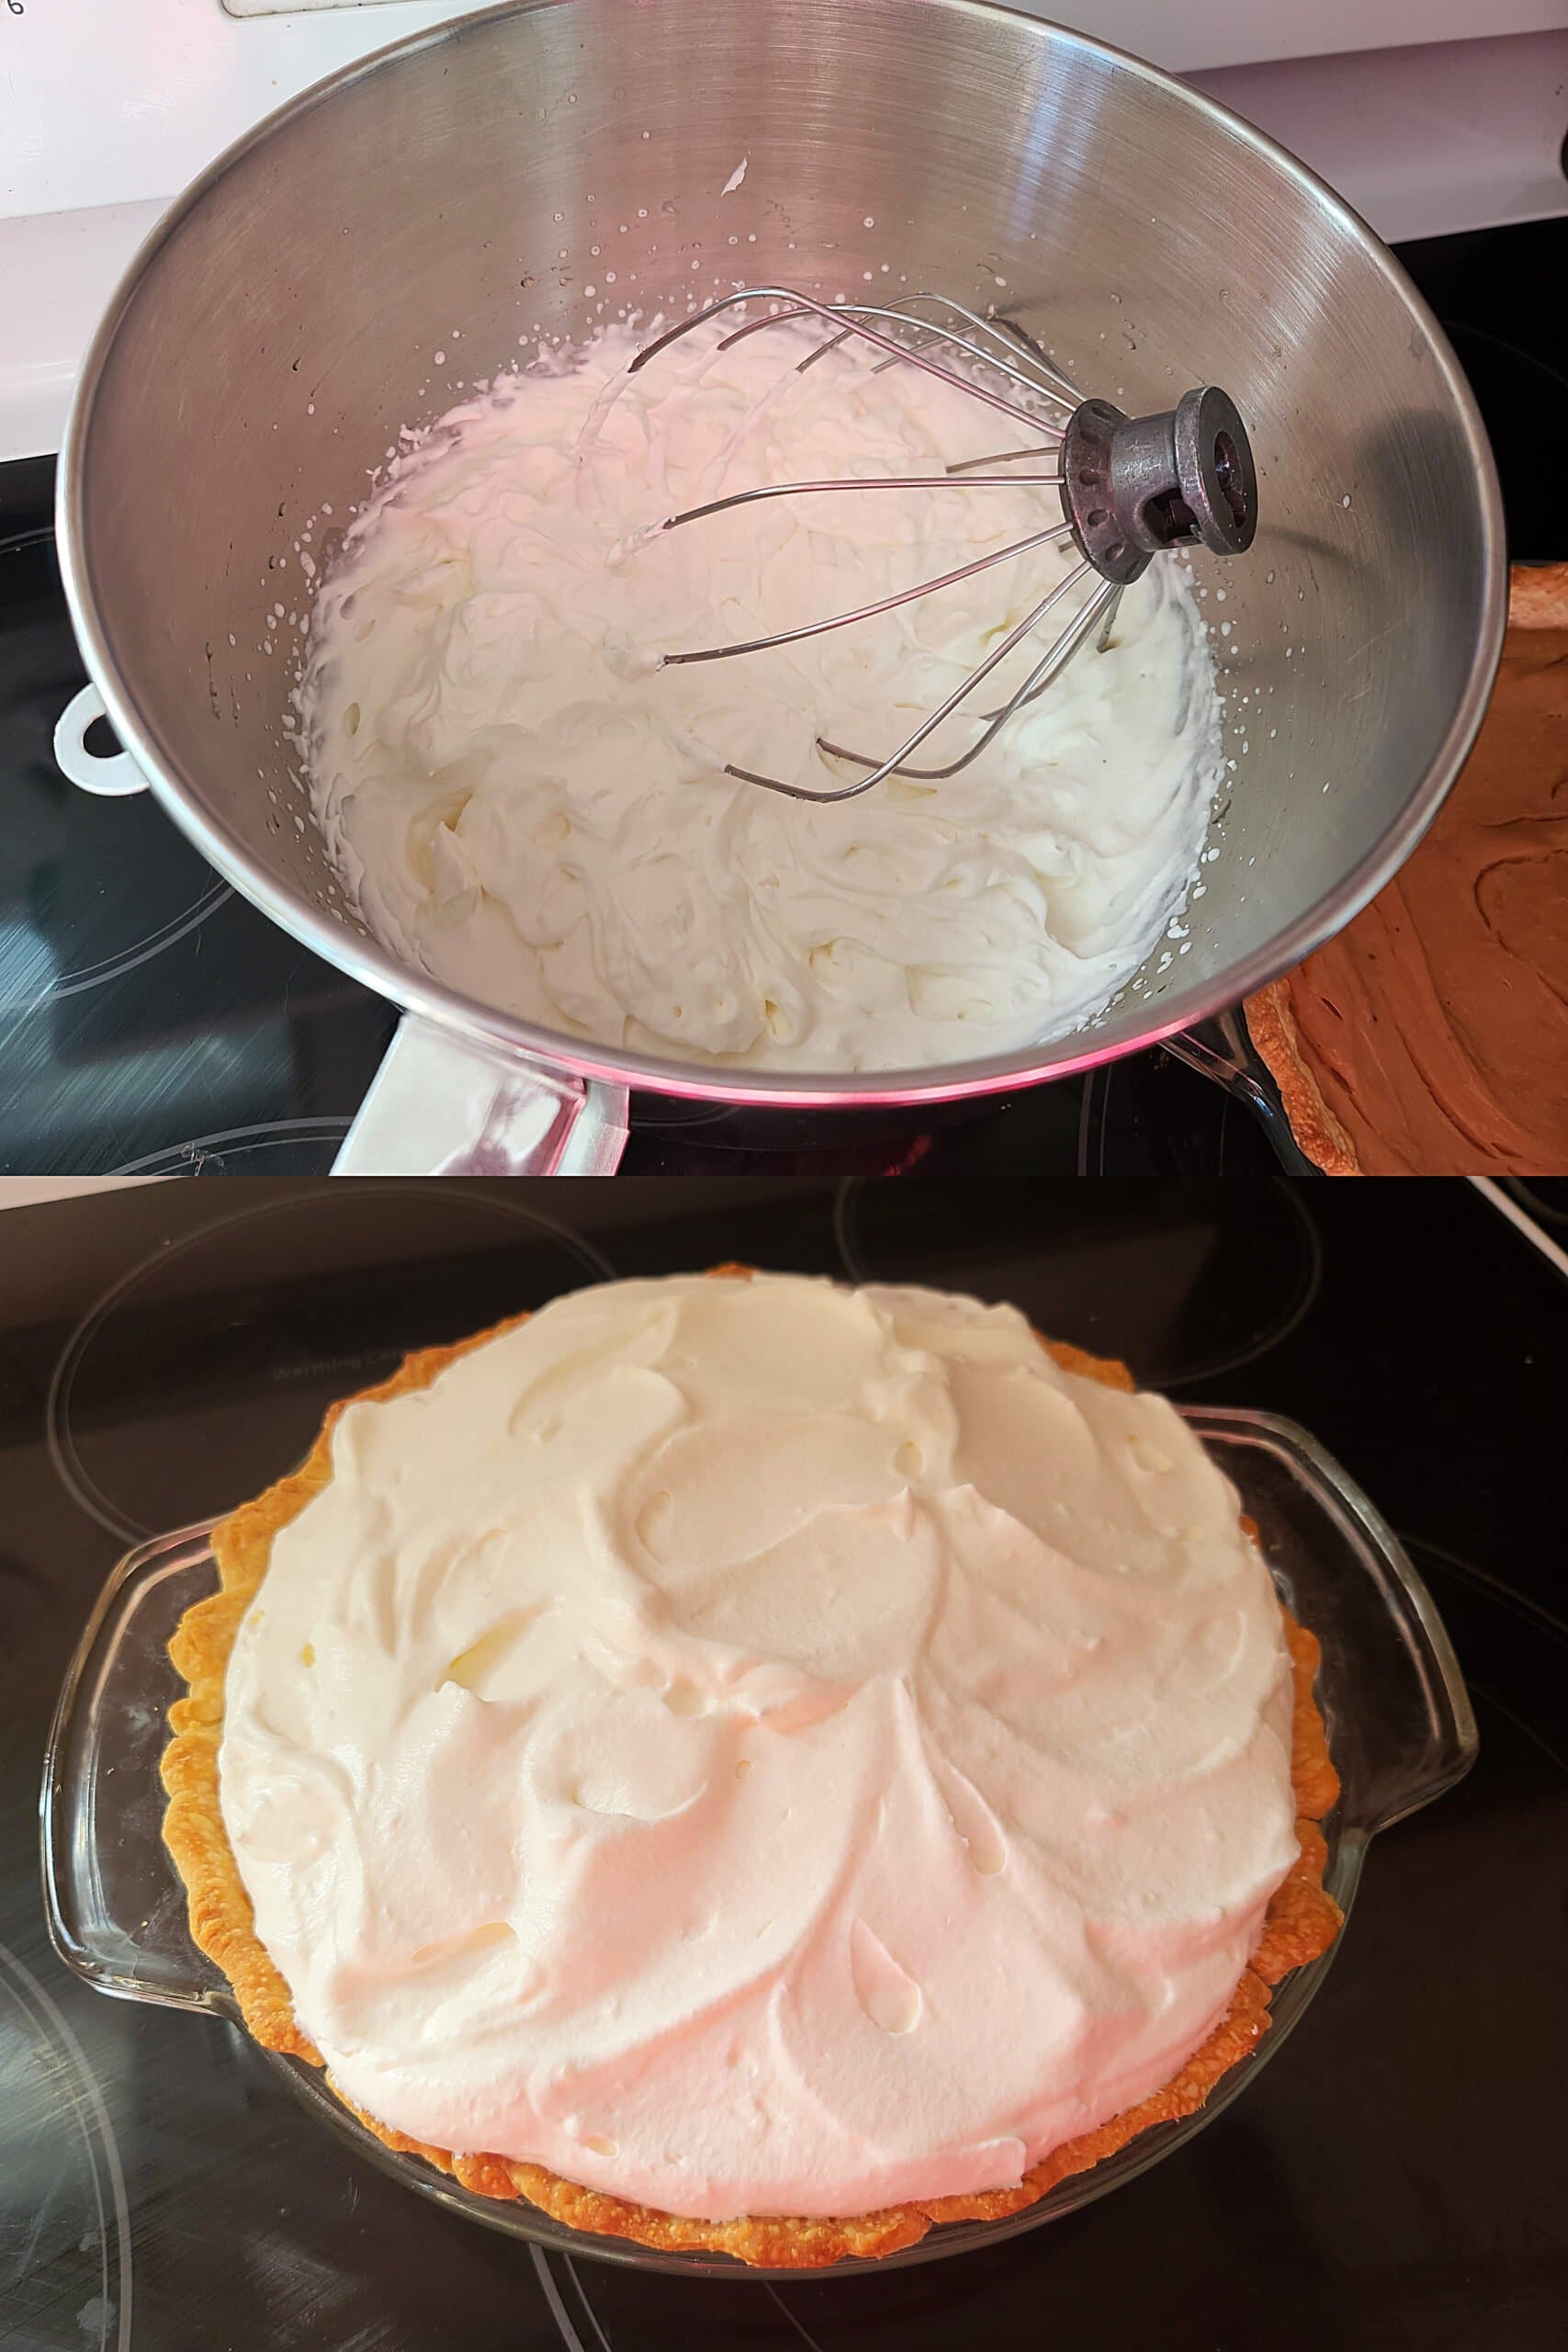 A two part image showing whipped cream in a mixing bowl, and the topped pie.